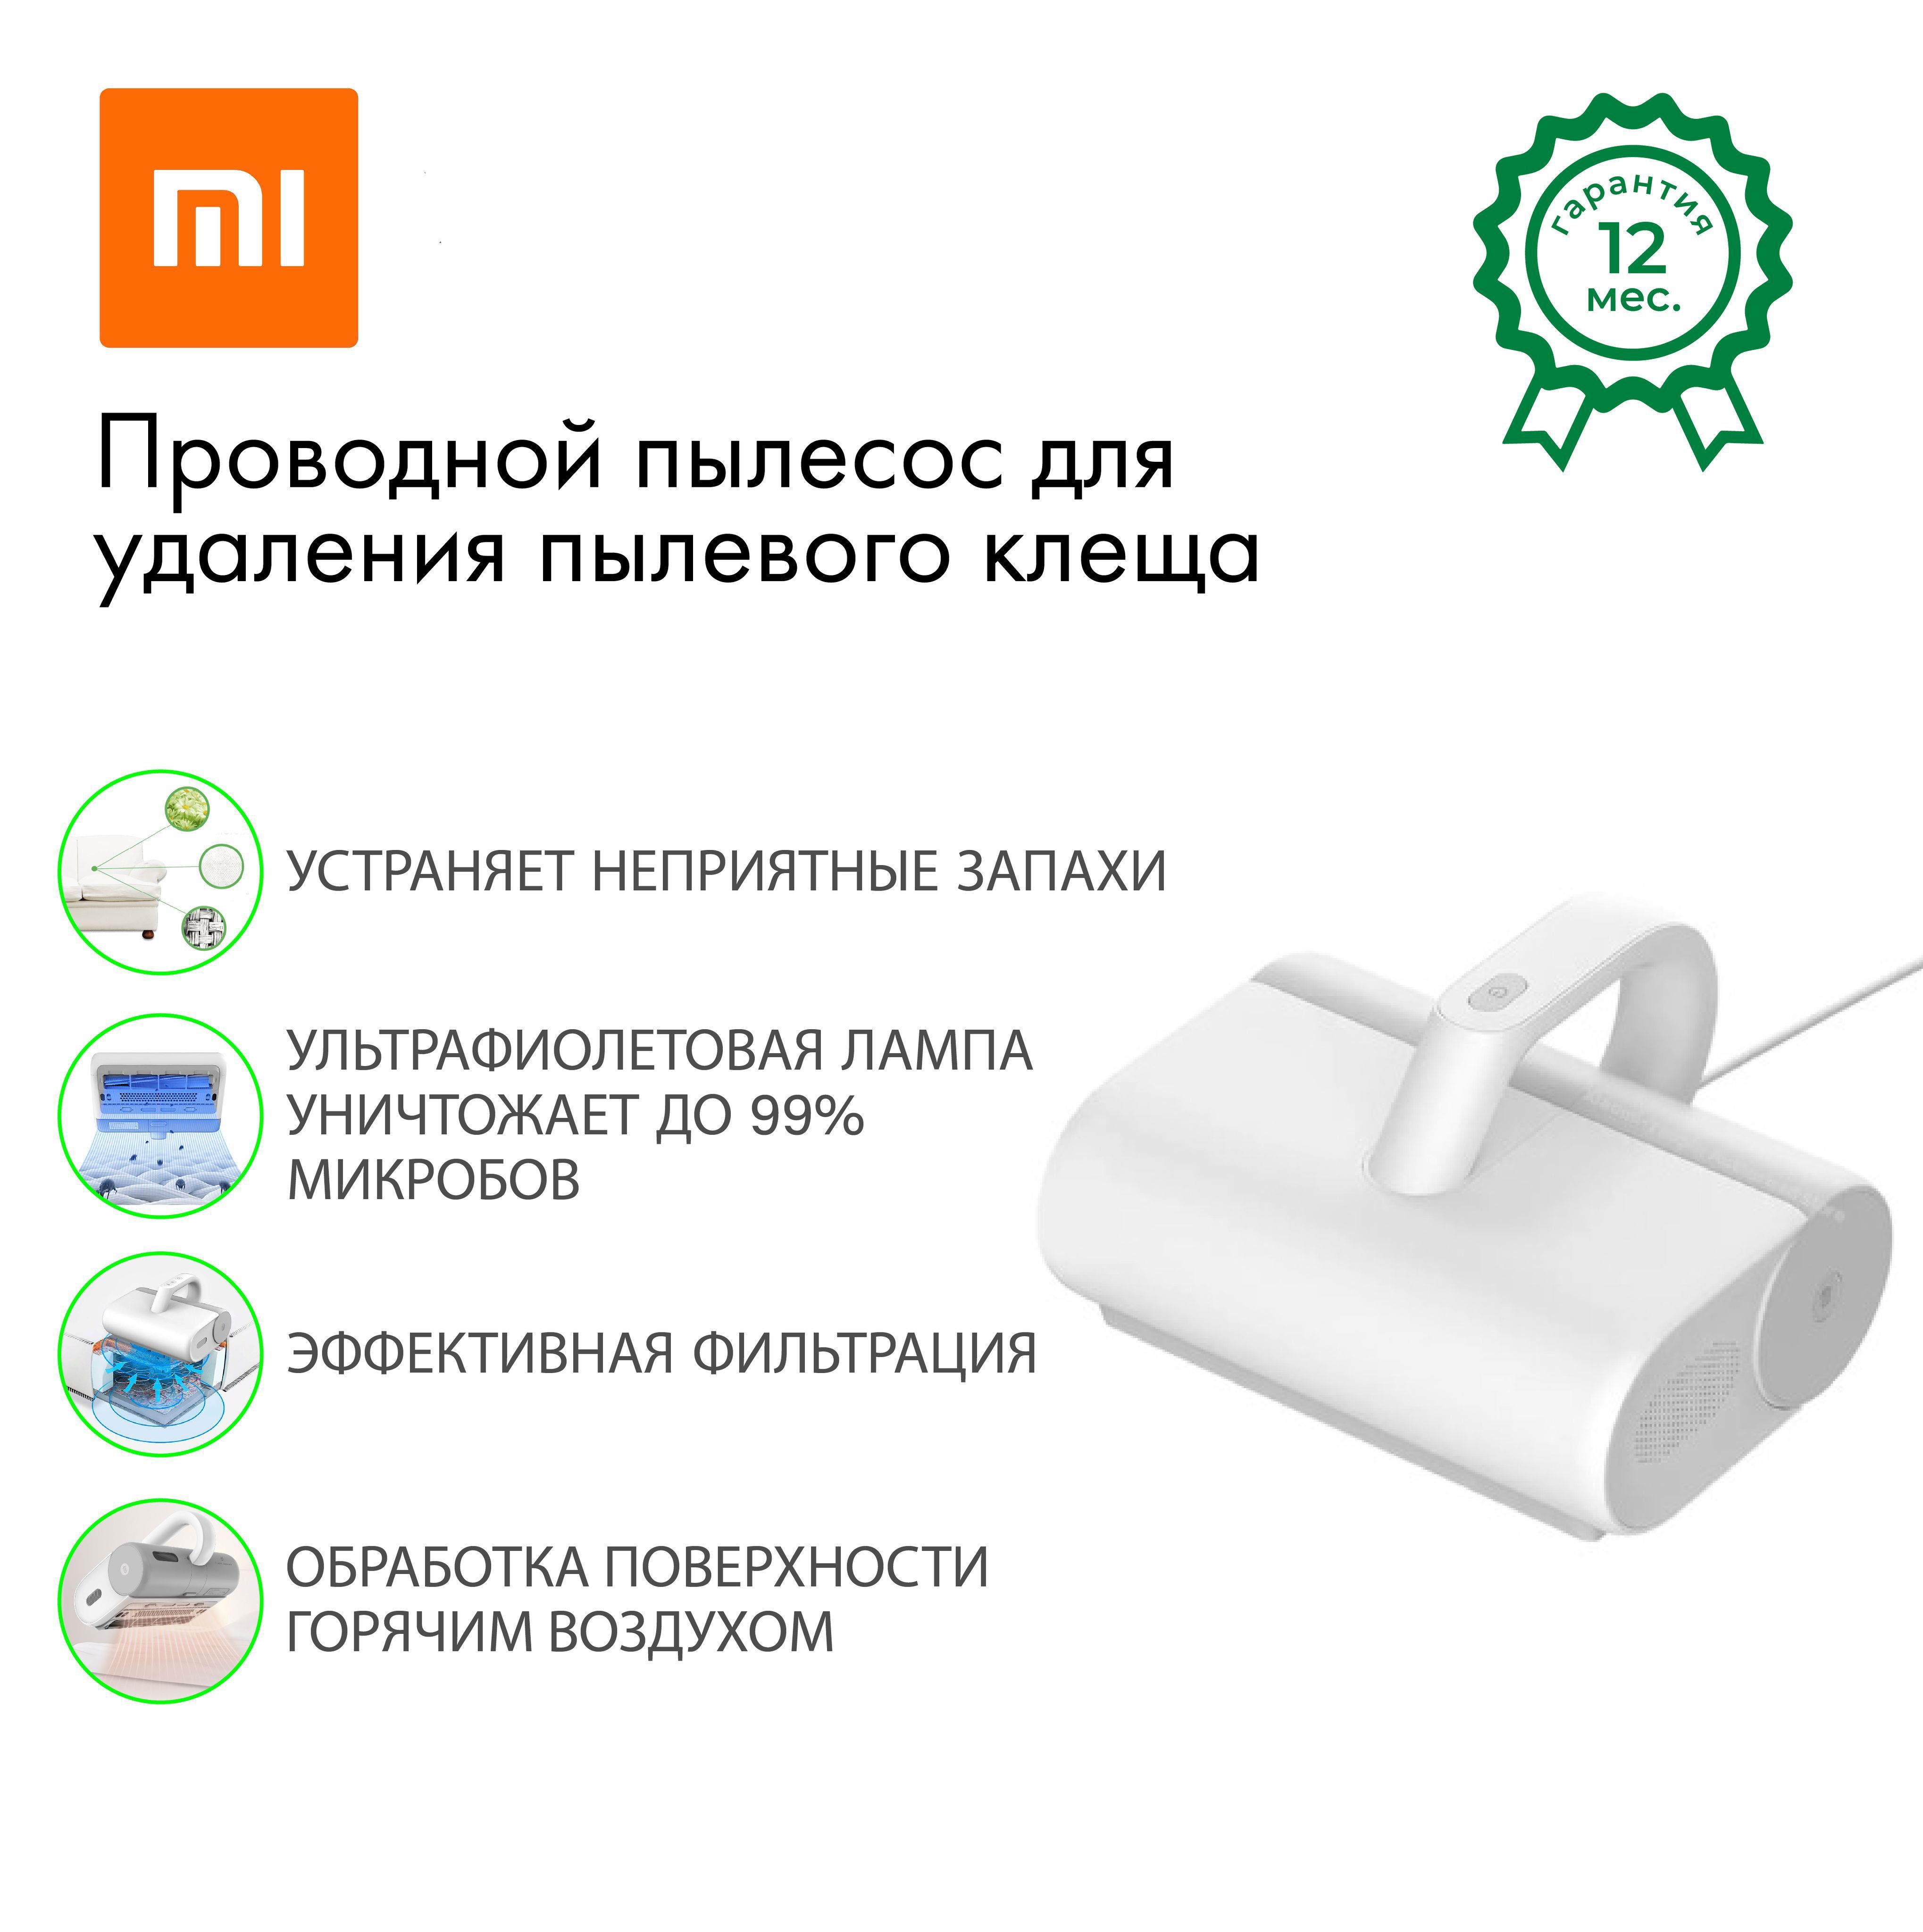 Xiaomi dust mite vacuum cleaner. Xiaomi Mijia Dust Mite Vacuum Cleaner. Xiaomi Dust Mite Vacuum Cleaner mjcmy01dy лампочка.